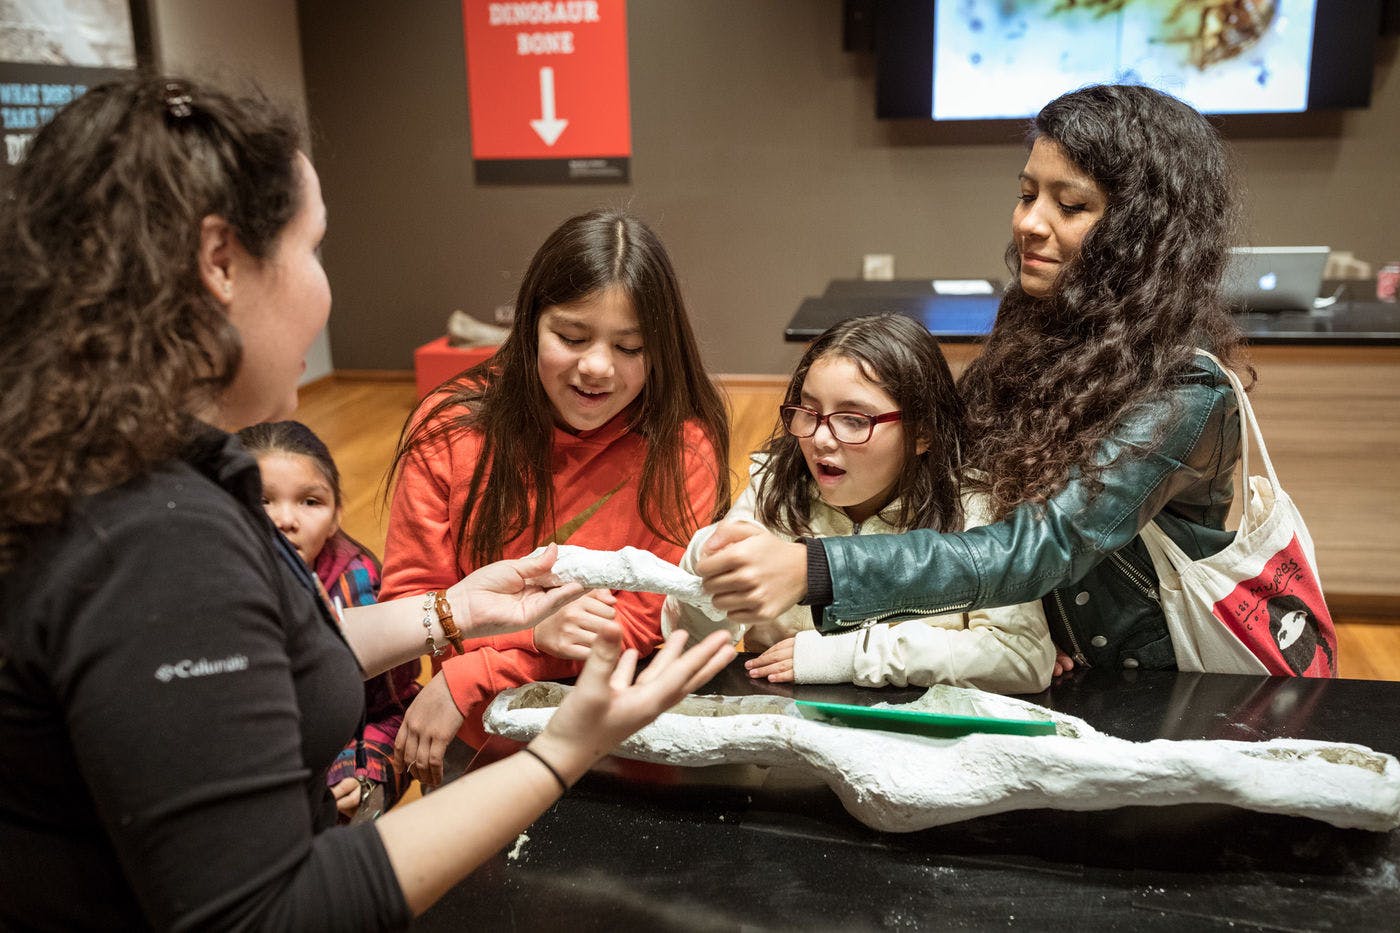 Young visitors and a museum educator examine a teaching specimen together in the Grainger Science Hub